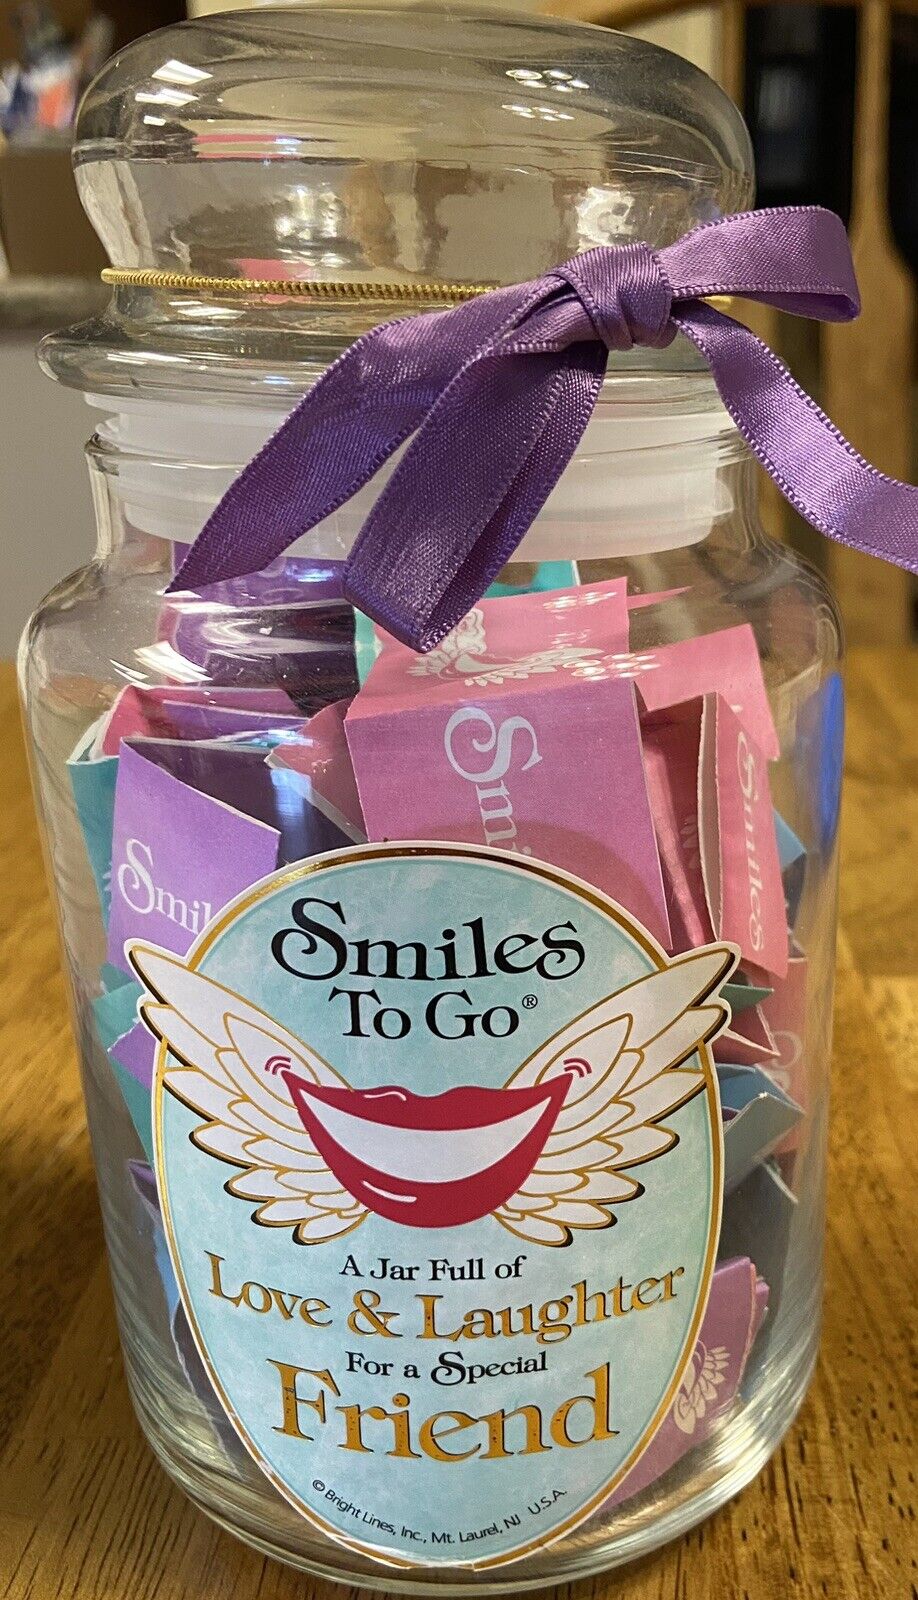 Smiles to go a jar full of love and laughter